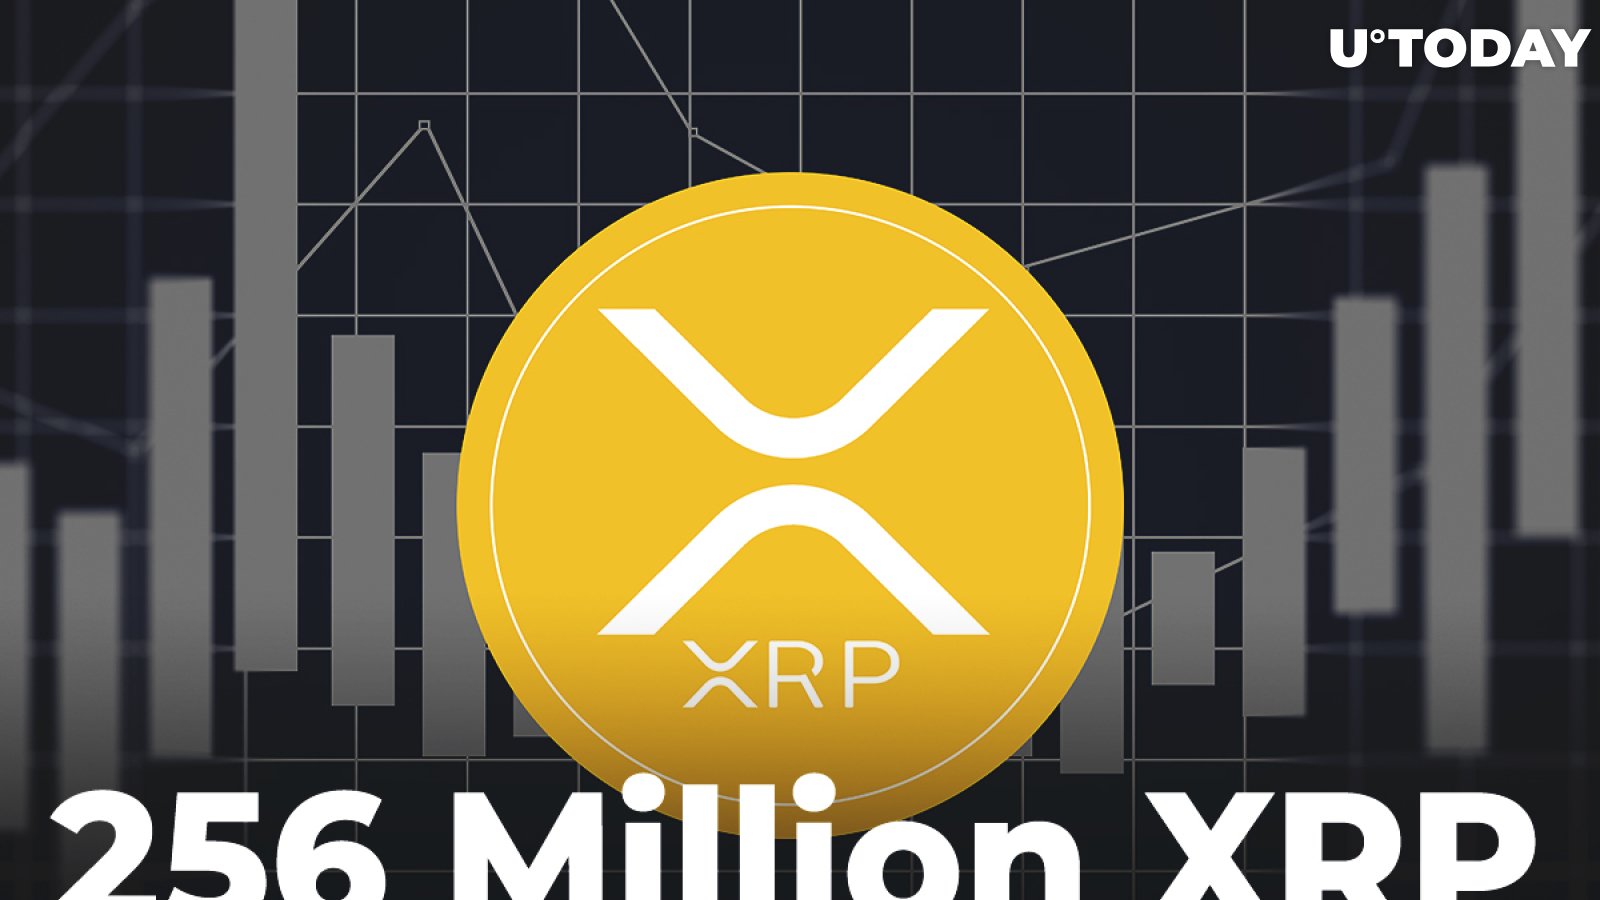 256 Million XRP Transferred from Coinbase Wallet